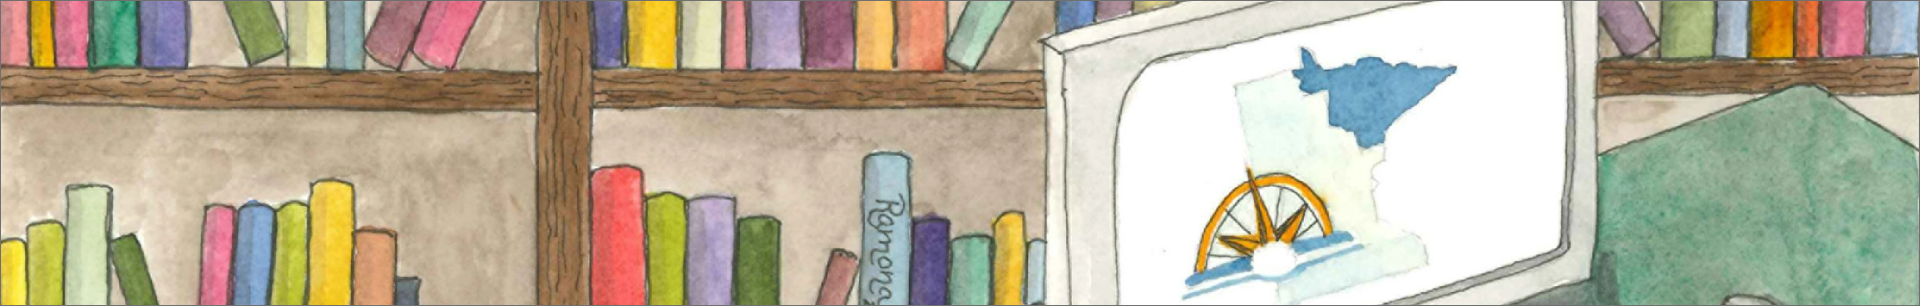 Drawing of library books on a shelf with a drawing of the state of Minnesota and Arrowhead County.